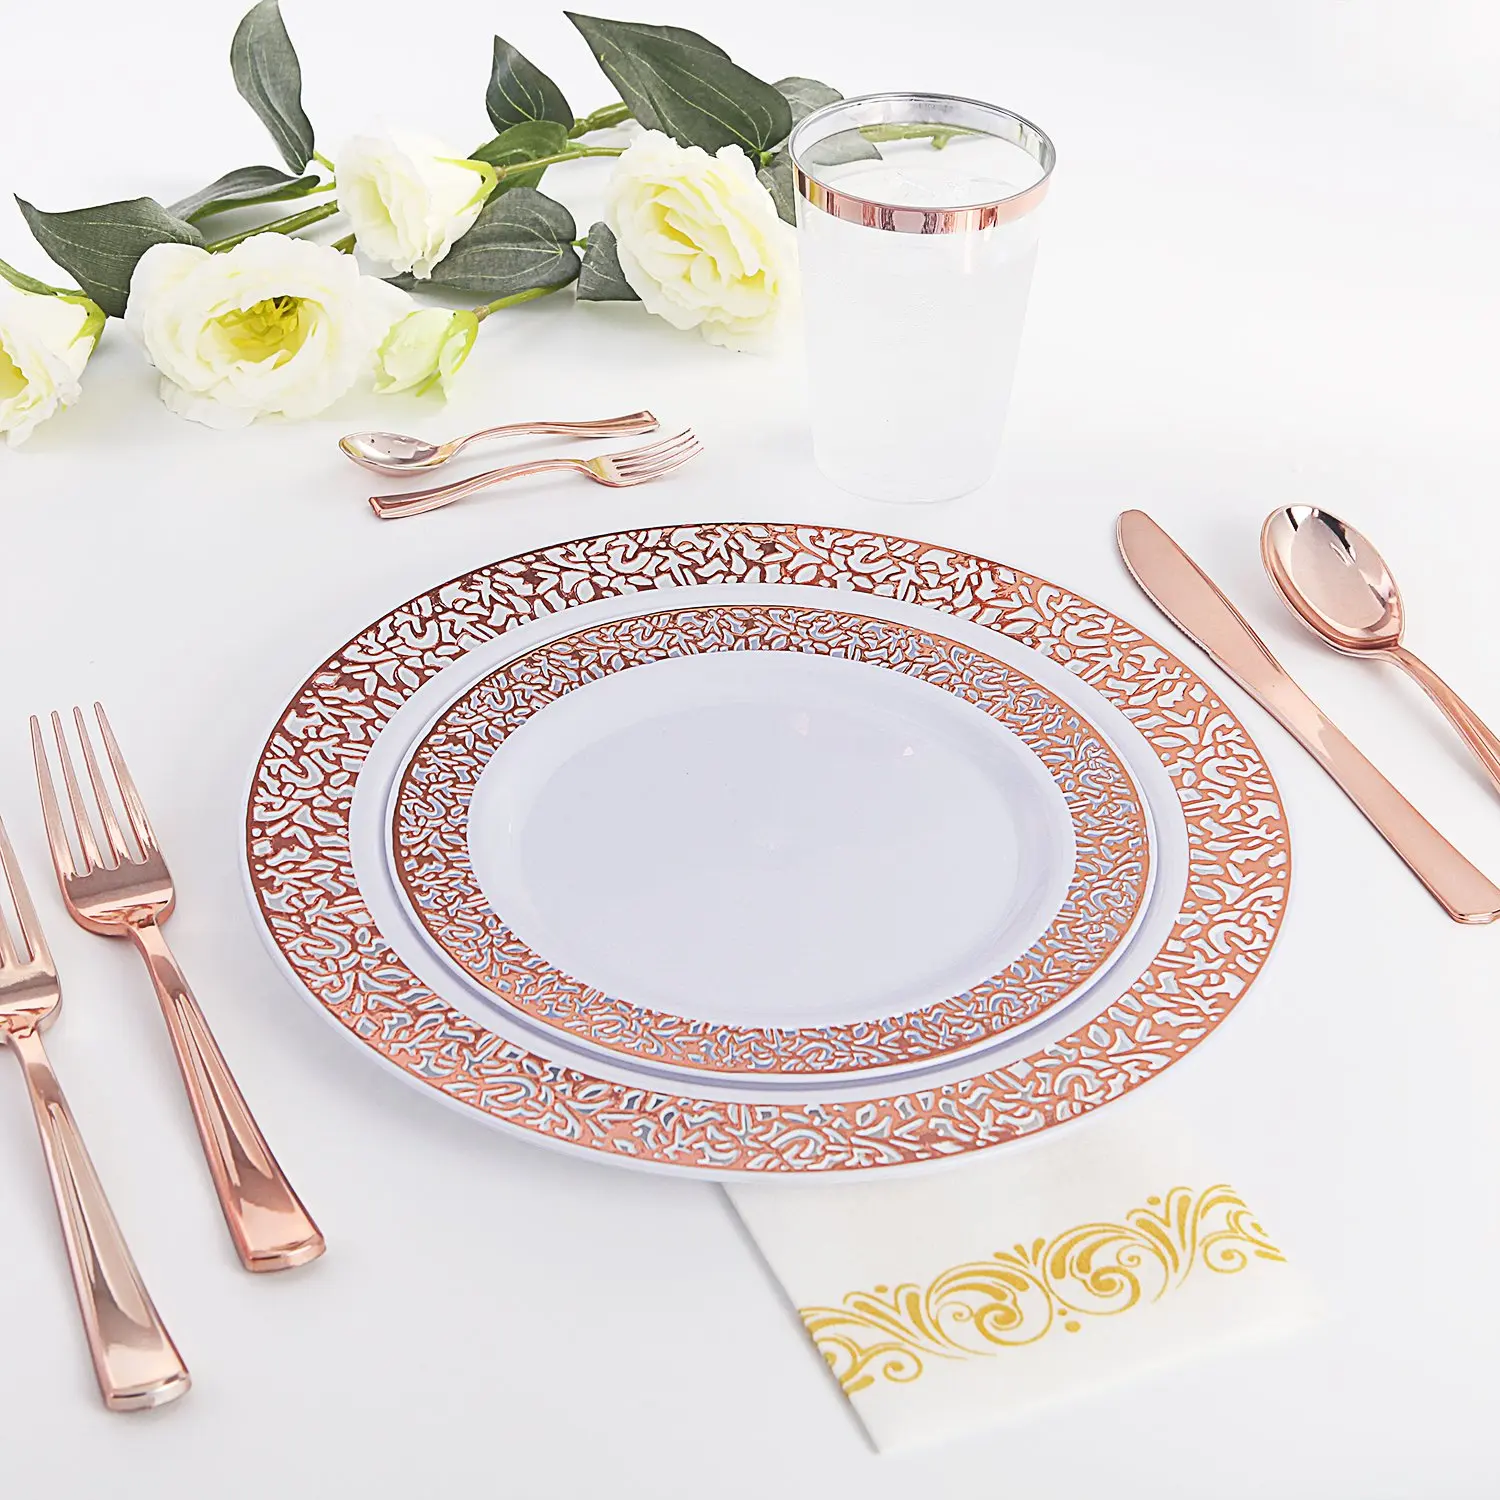 Rose Gold rose gold Rose Gold Plastic Silverware 60pcs Rose Gold Plastic Plates Disposable Wedding Plates in Heavy Weight,Enjoylife Gold Plates for Parties 